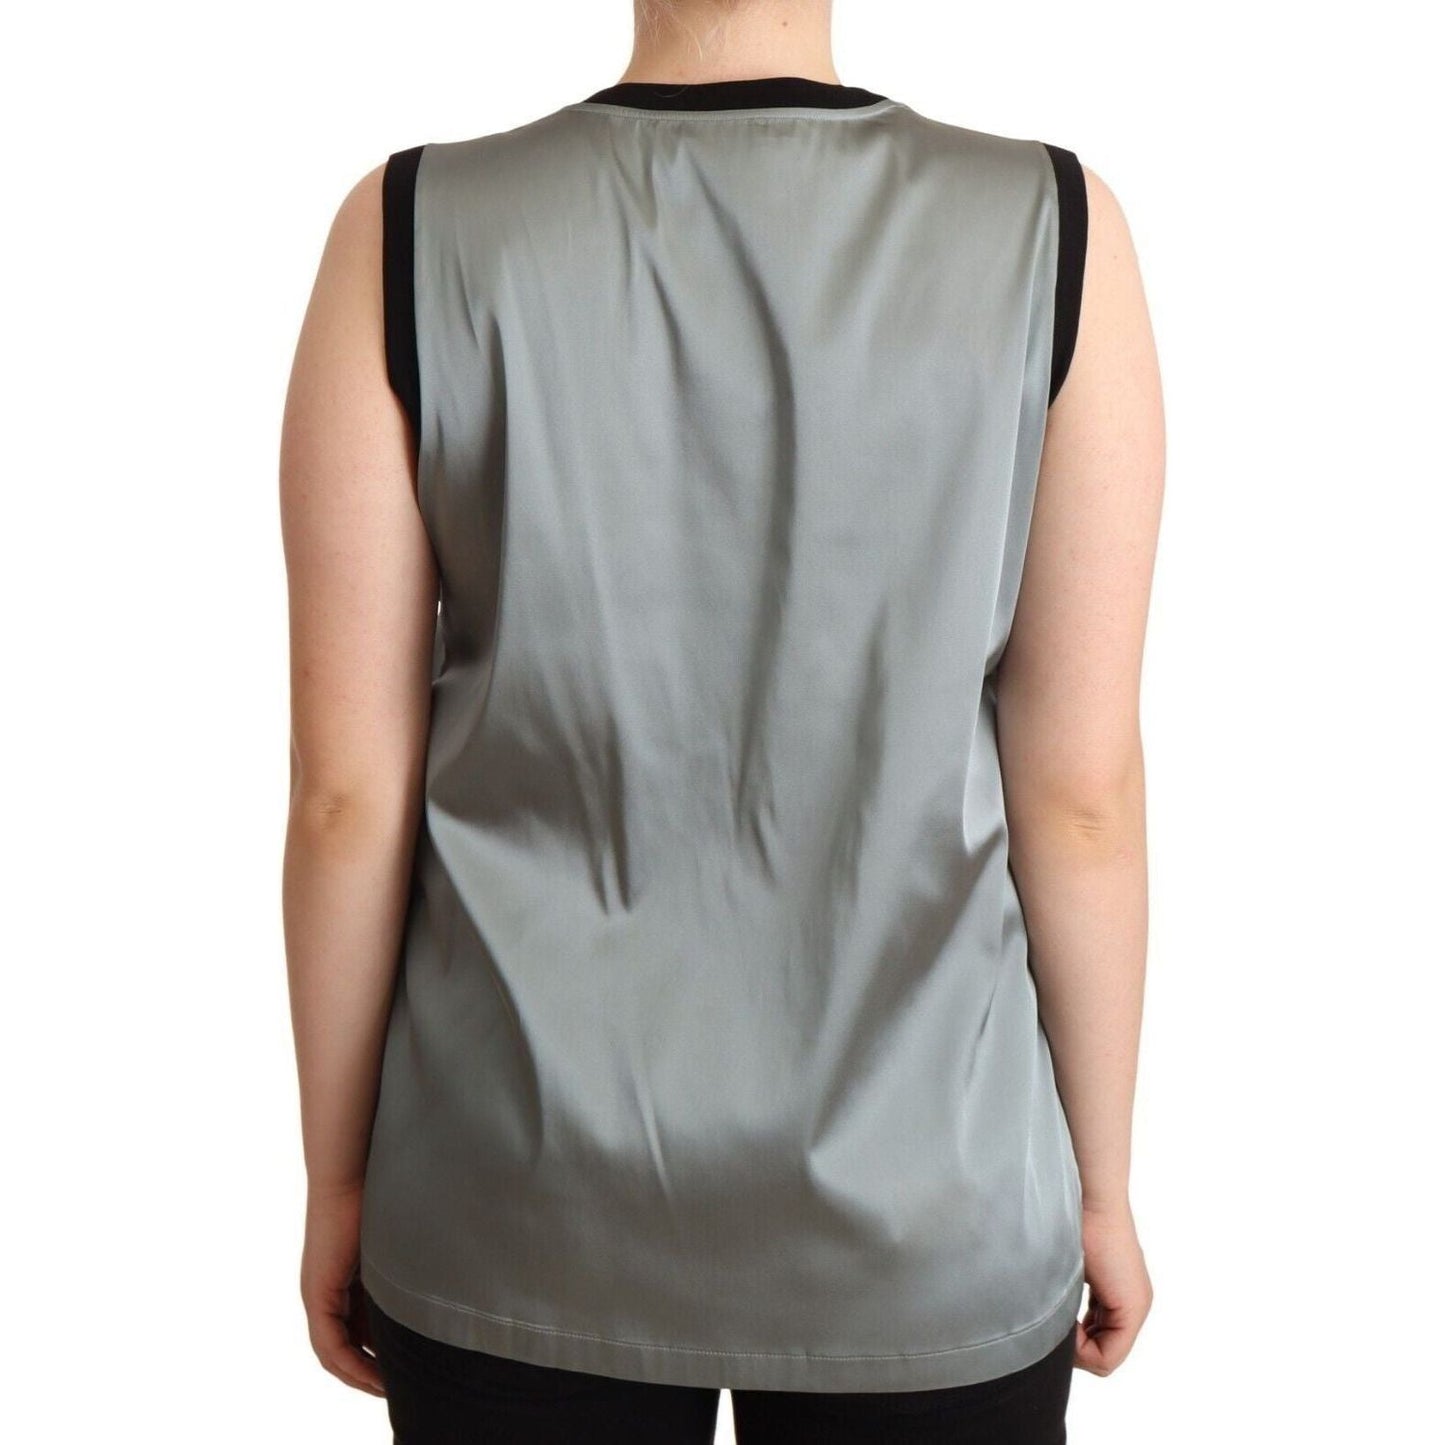 Dolce & Gabbana Elegant Silver Sleeveless Blouse WOMAN TOPS AND SHIRTS silver-round-neck-sleeveless-casual-tank-top